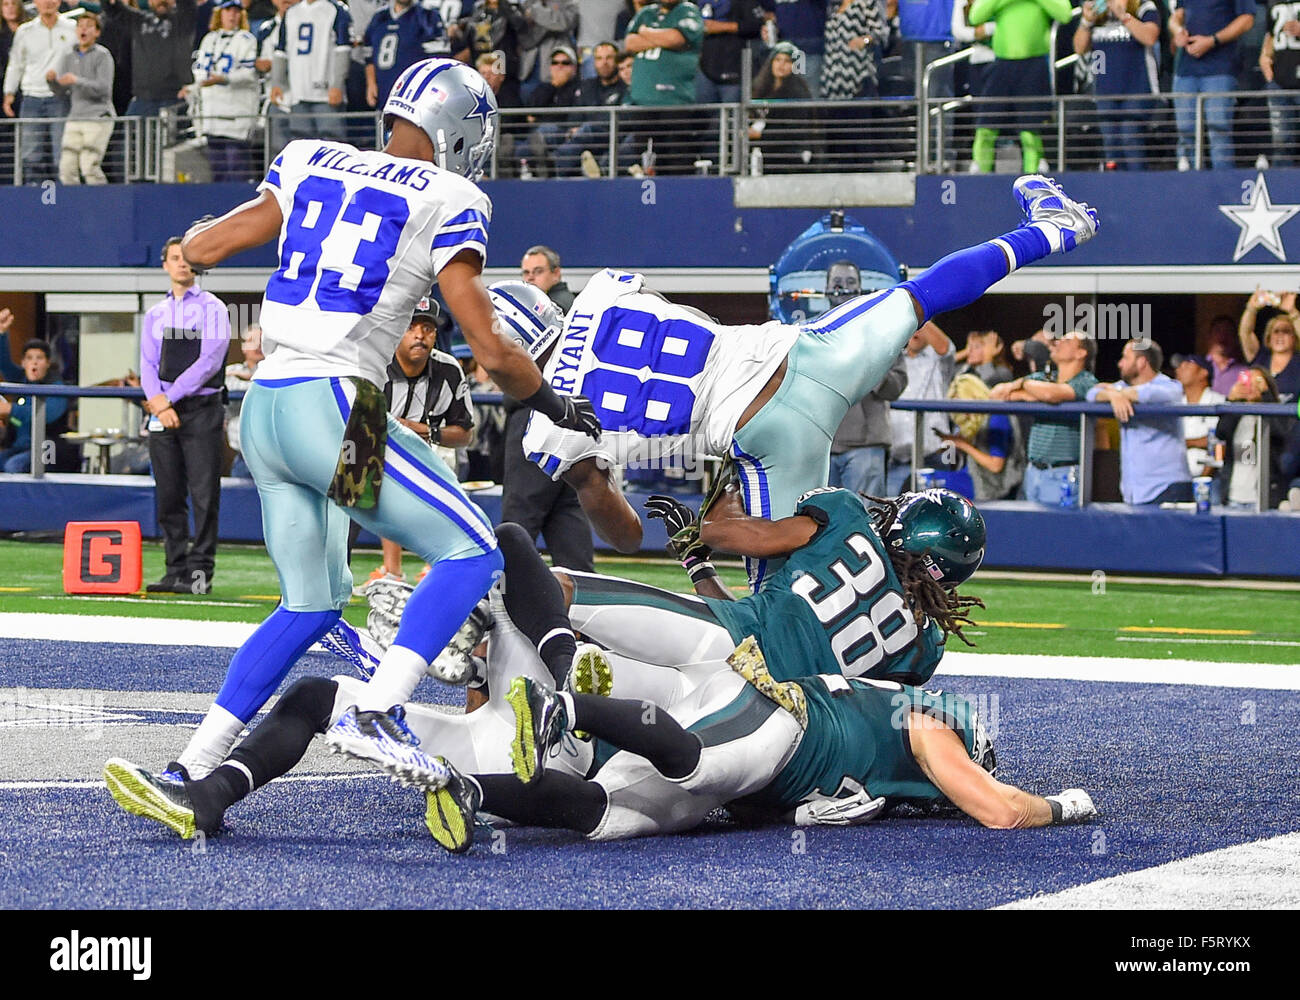 November 08th, 2015:.Dallas Cowboys wide receiver Dez Bryant (88) goes up for a hail mary pass and makes the catch for a touchdown as Philadelphia Eagles free safety Chris Maragos (42) and Philadelphia Eagles cornerback Nolan Carroll (23) defend.during an NFL football game between the Philadelphia Eagles and Dallas Cowboys on Sunday night at AT&T Stadium in Arlington, Texas. Eagles win in overtime 33-27.Manny Flores/CSM Stock Photo